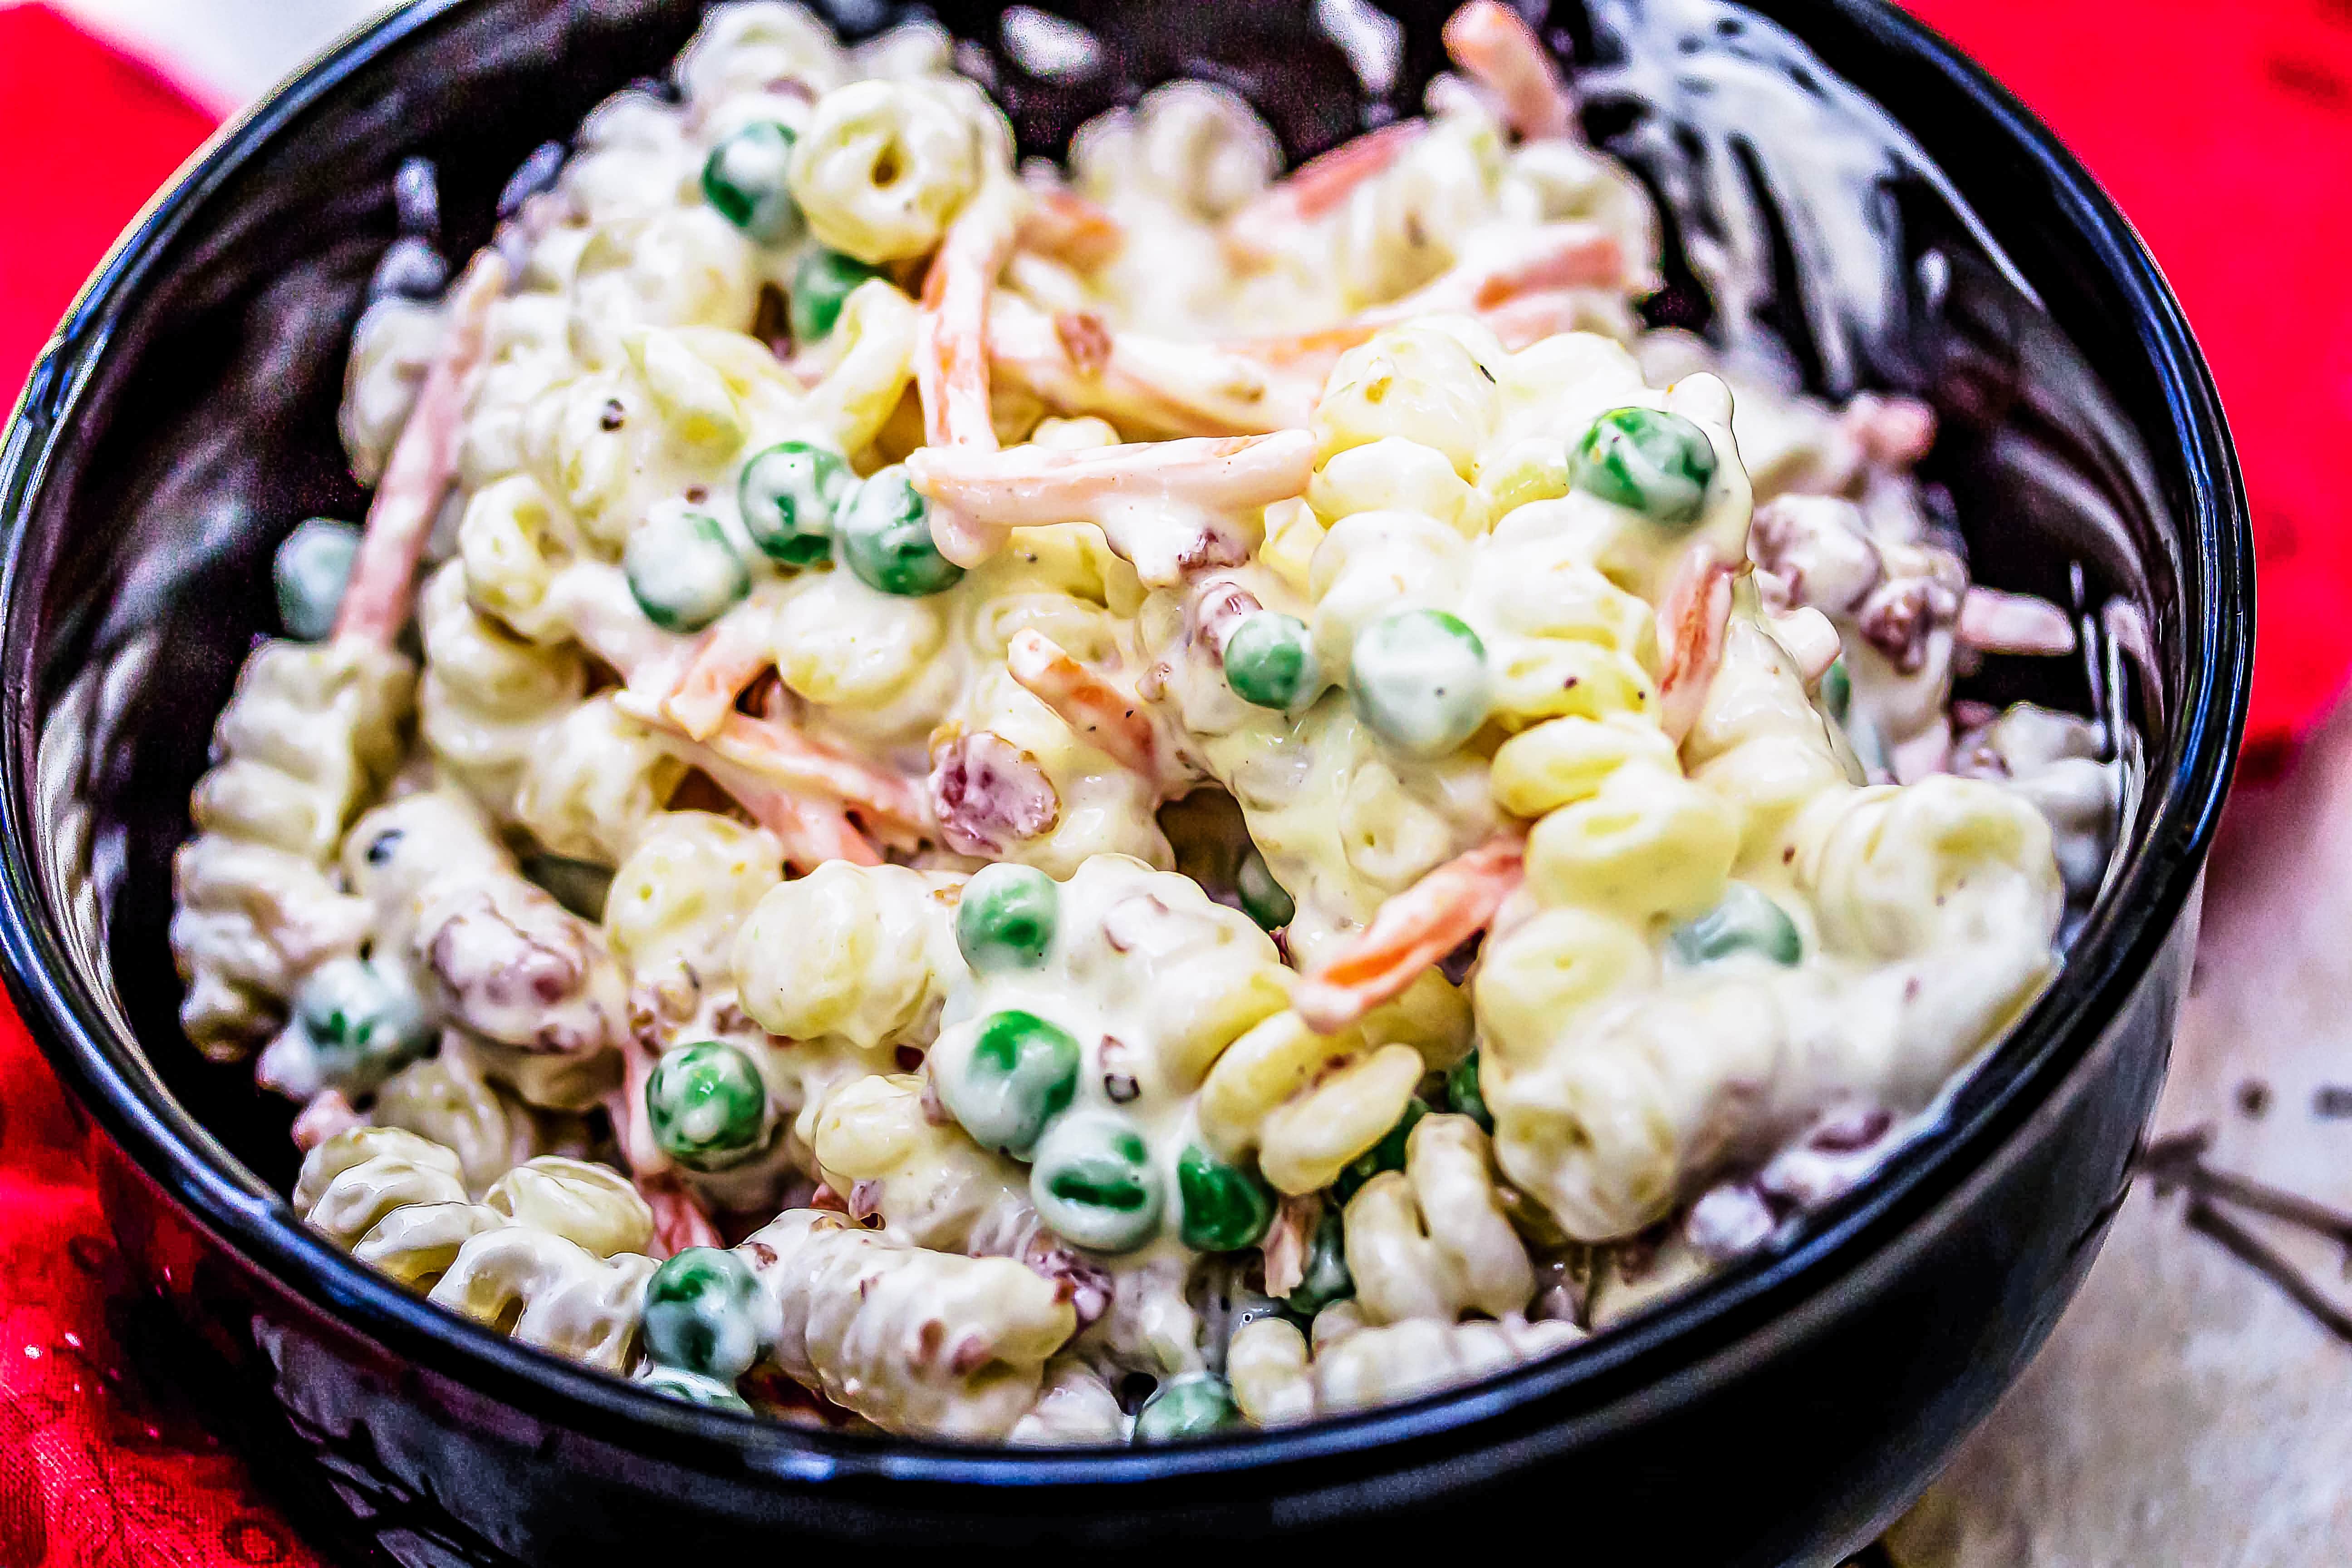 bacon ranch pasta salad in black bowl on red cloth